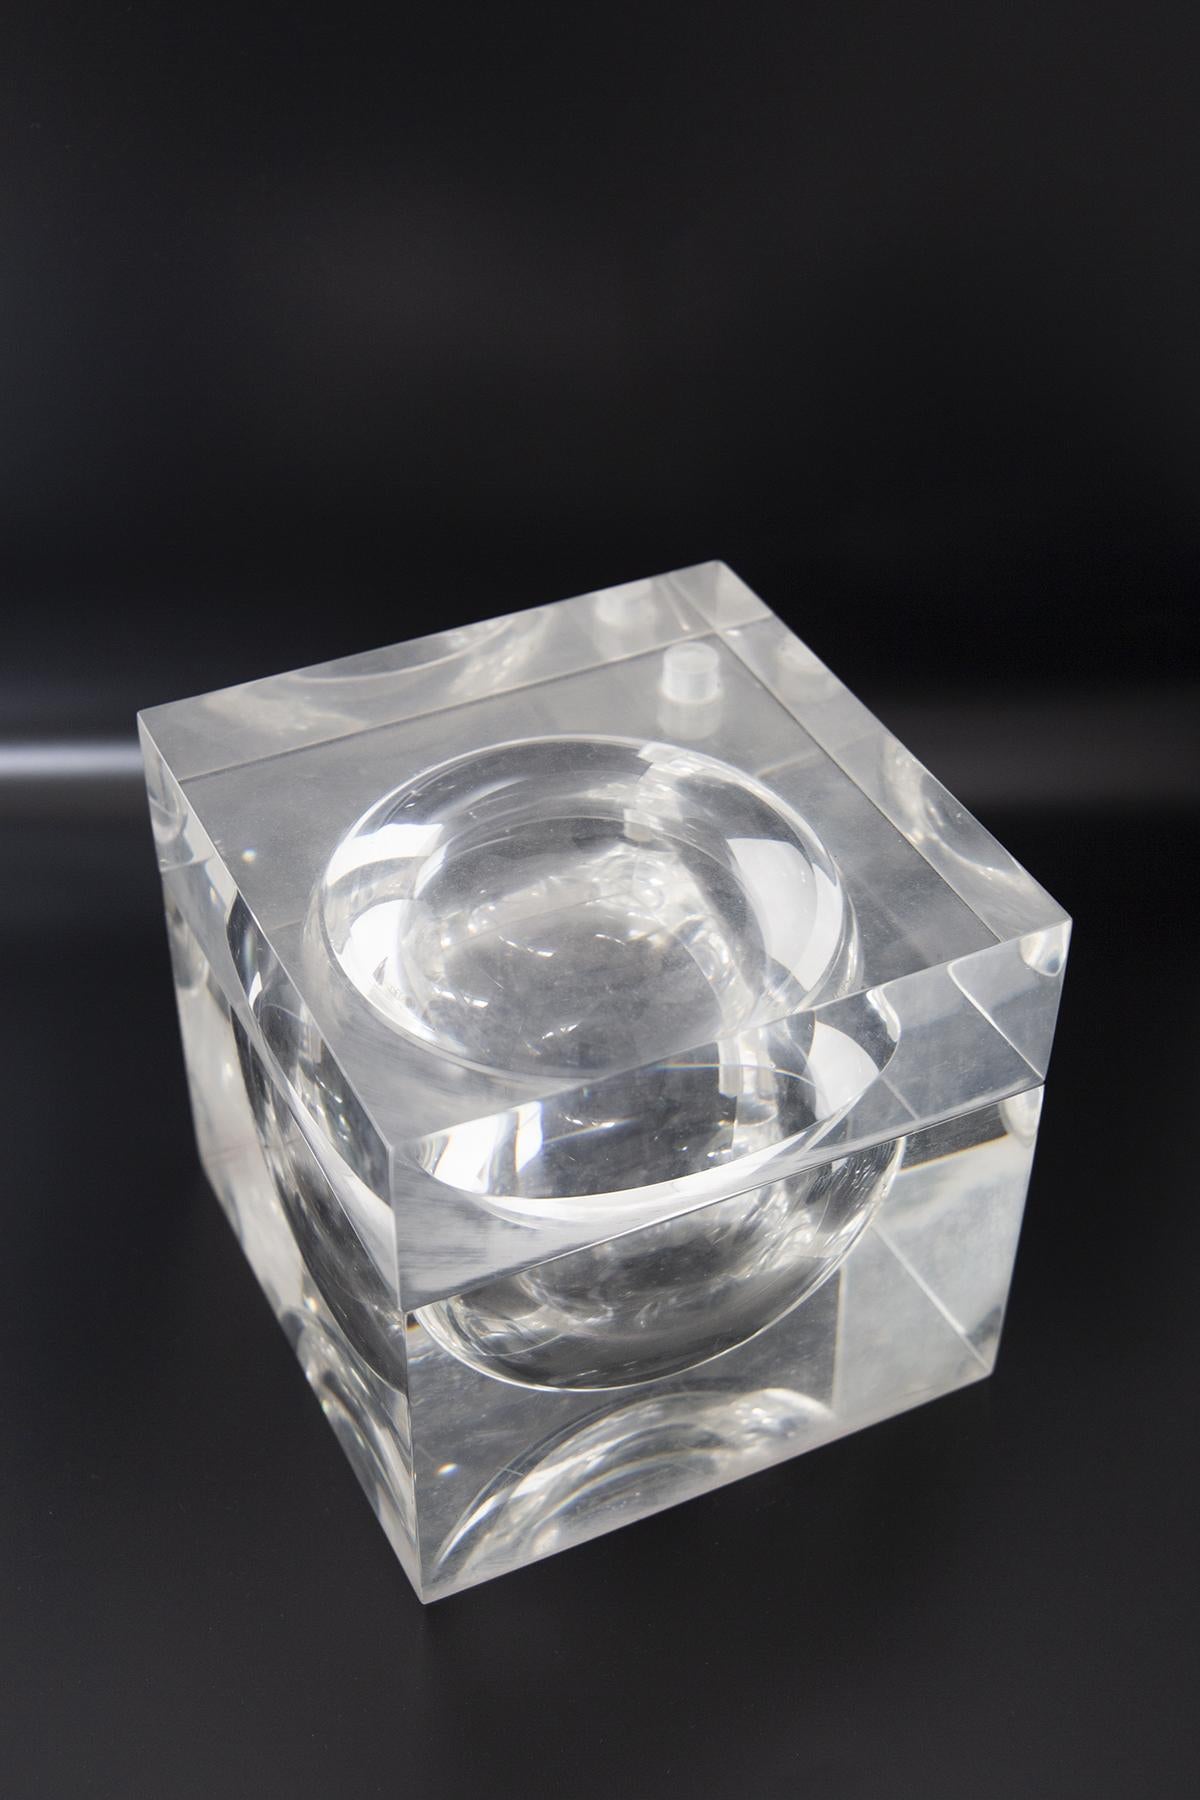 Eccentric Italian modernist cube by Alessandro Albrizzi from the 1970s. The cube is made of very thick transparent plexiglass or lucida. The cube is an elegant decorative element from the 1970s and can serve several functions . It can be placed in a